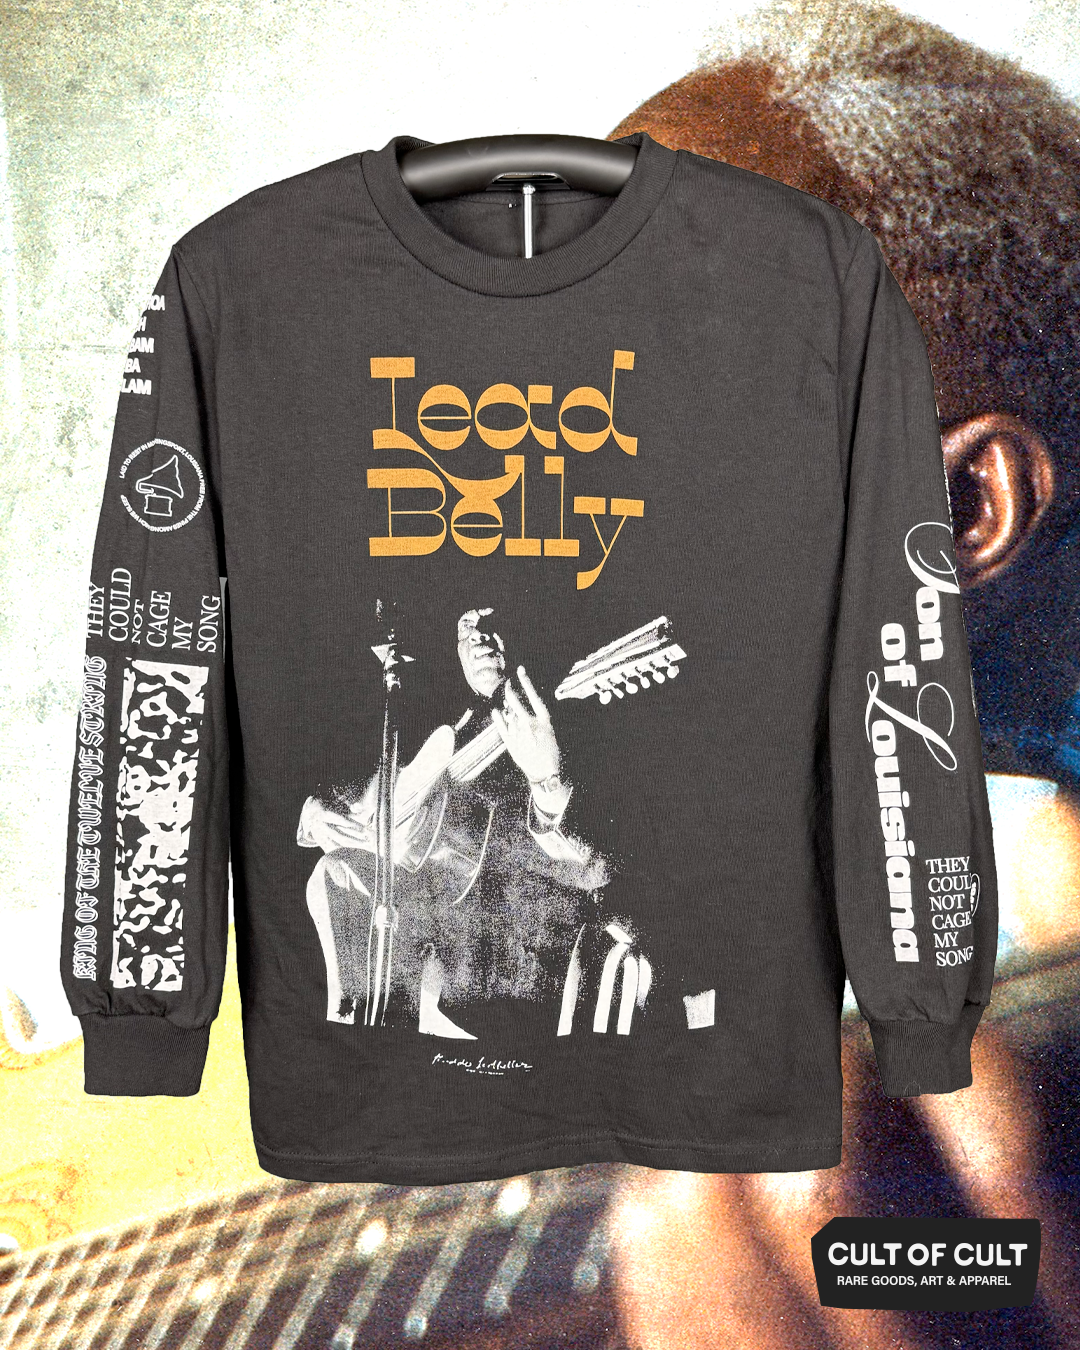 A front view of the black long sleeve Lead Belly shirt